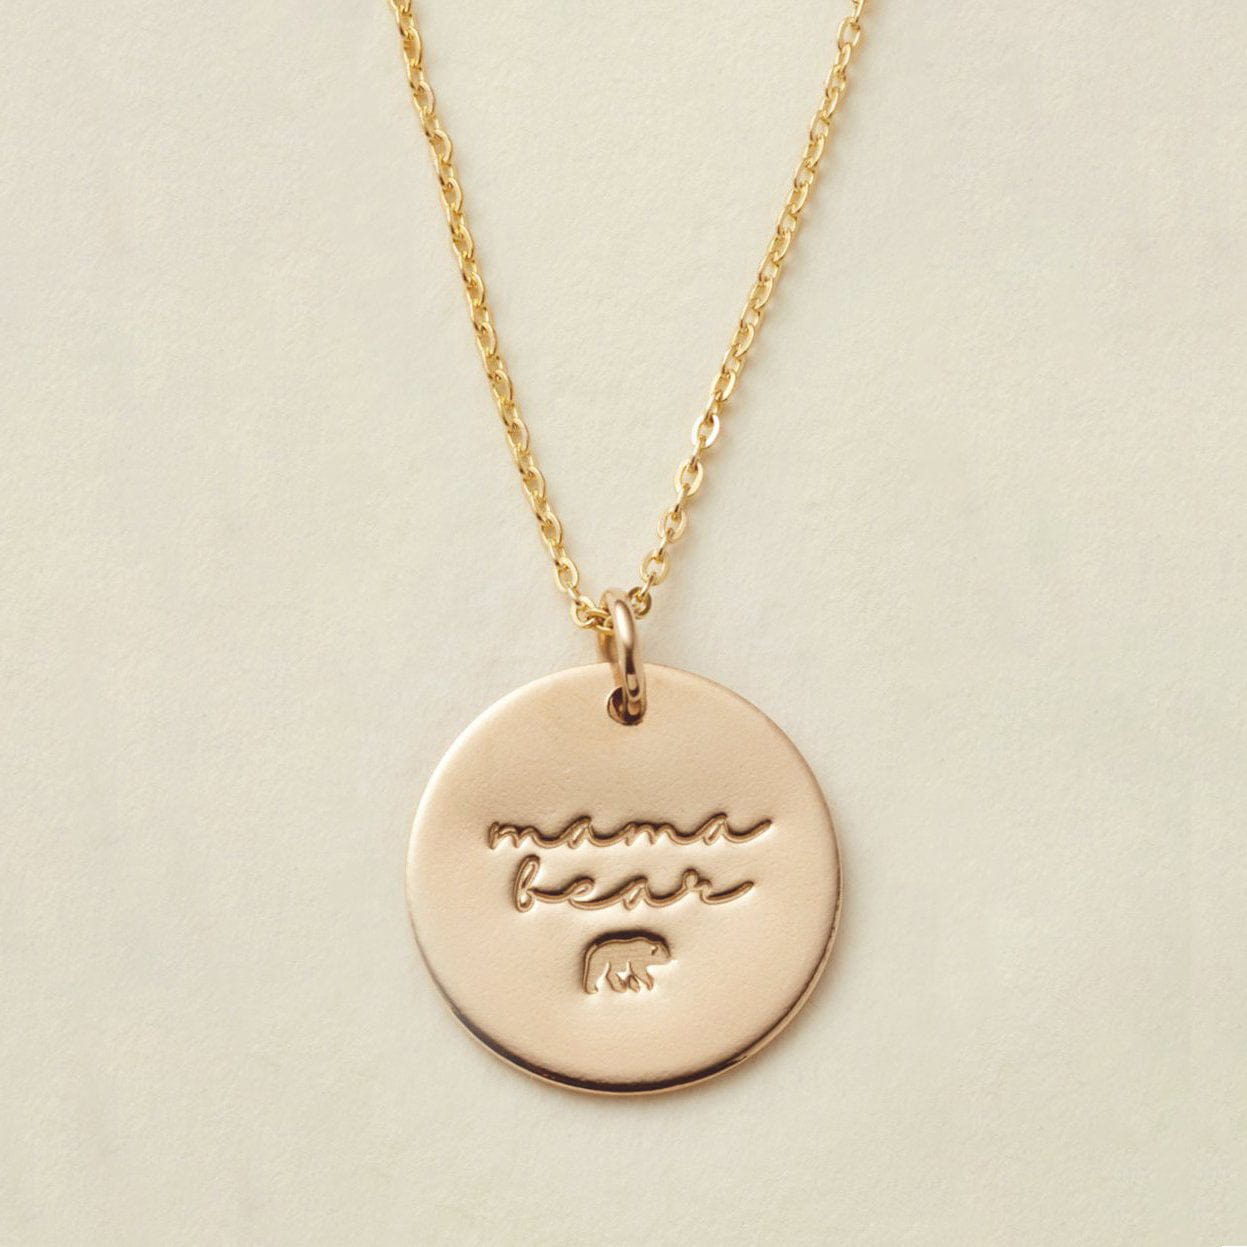 Mama Bear Disc Necklace- 5/8" Necklace